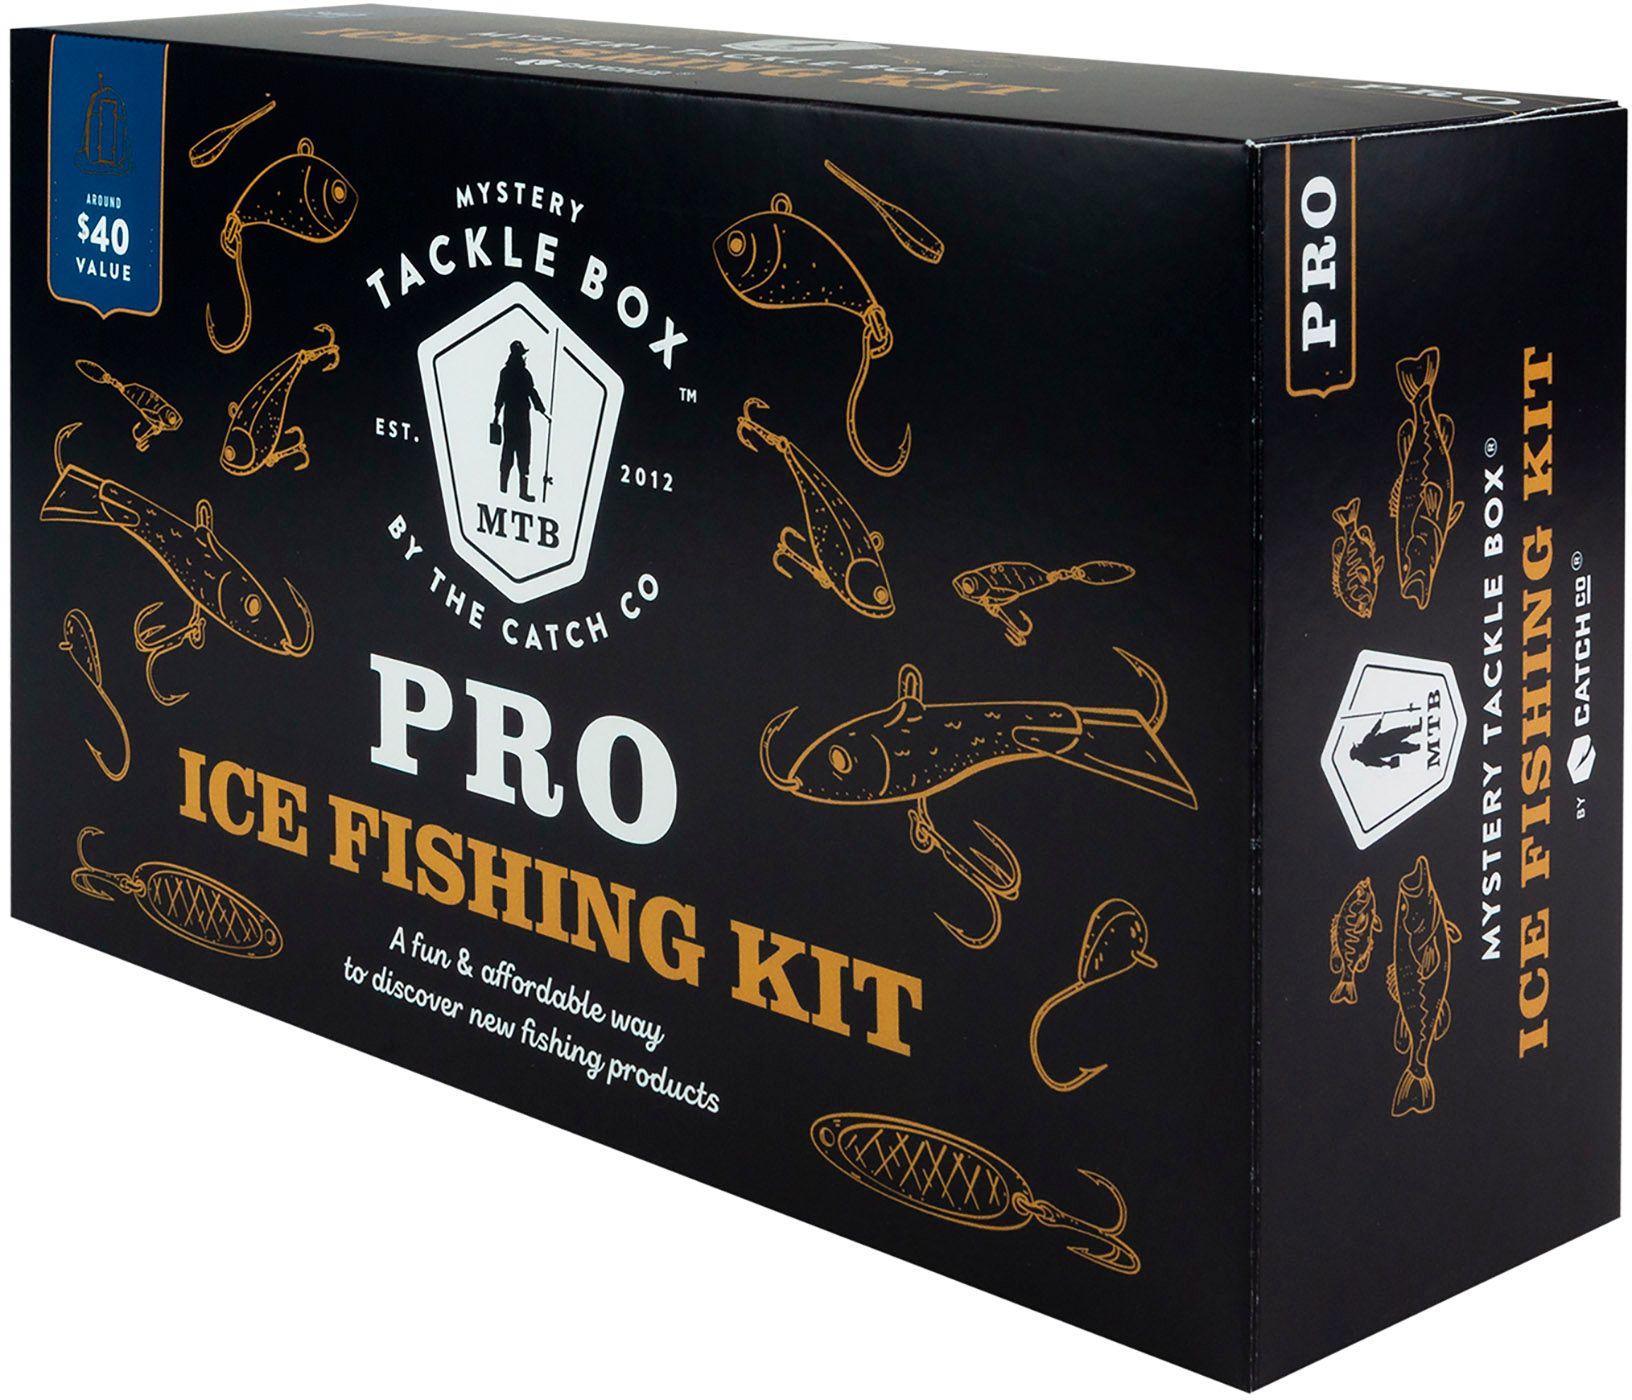 Dick's Sporting Goods Mystery Tackle Box Pro Ice Kit